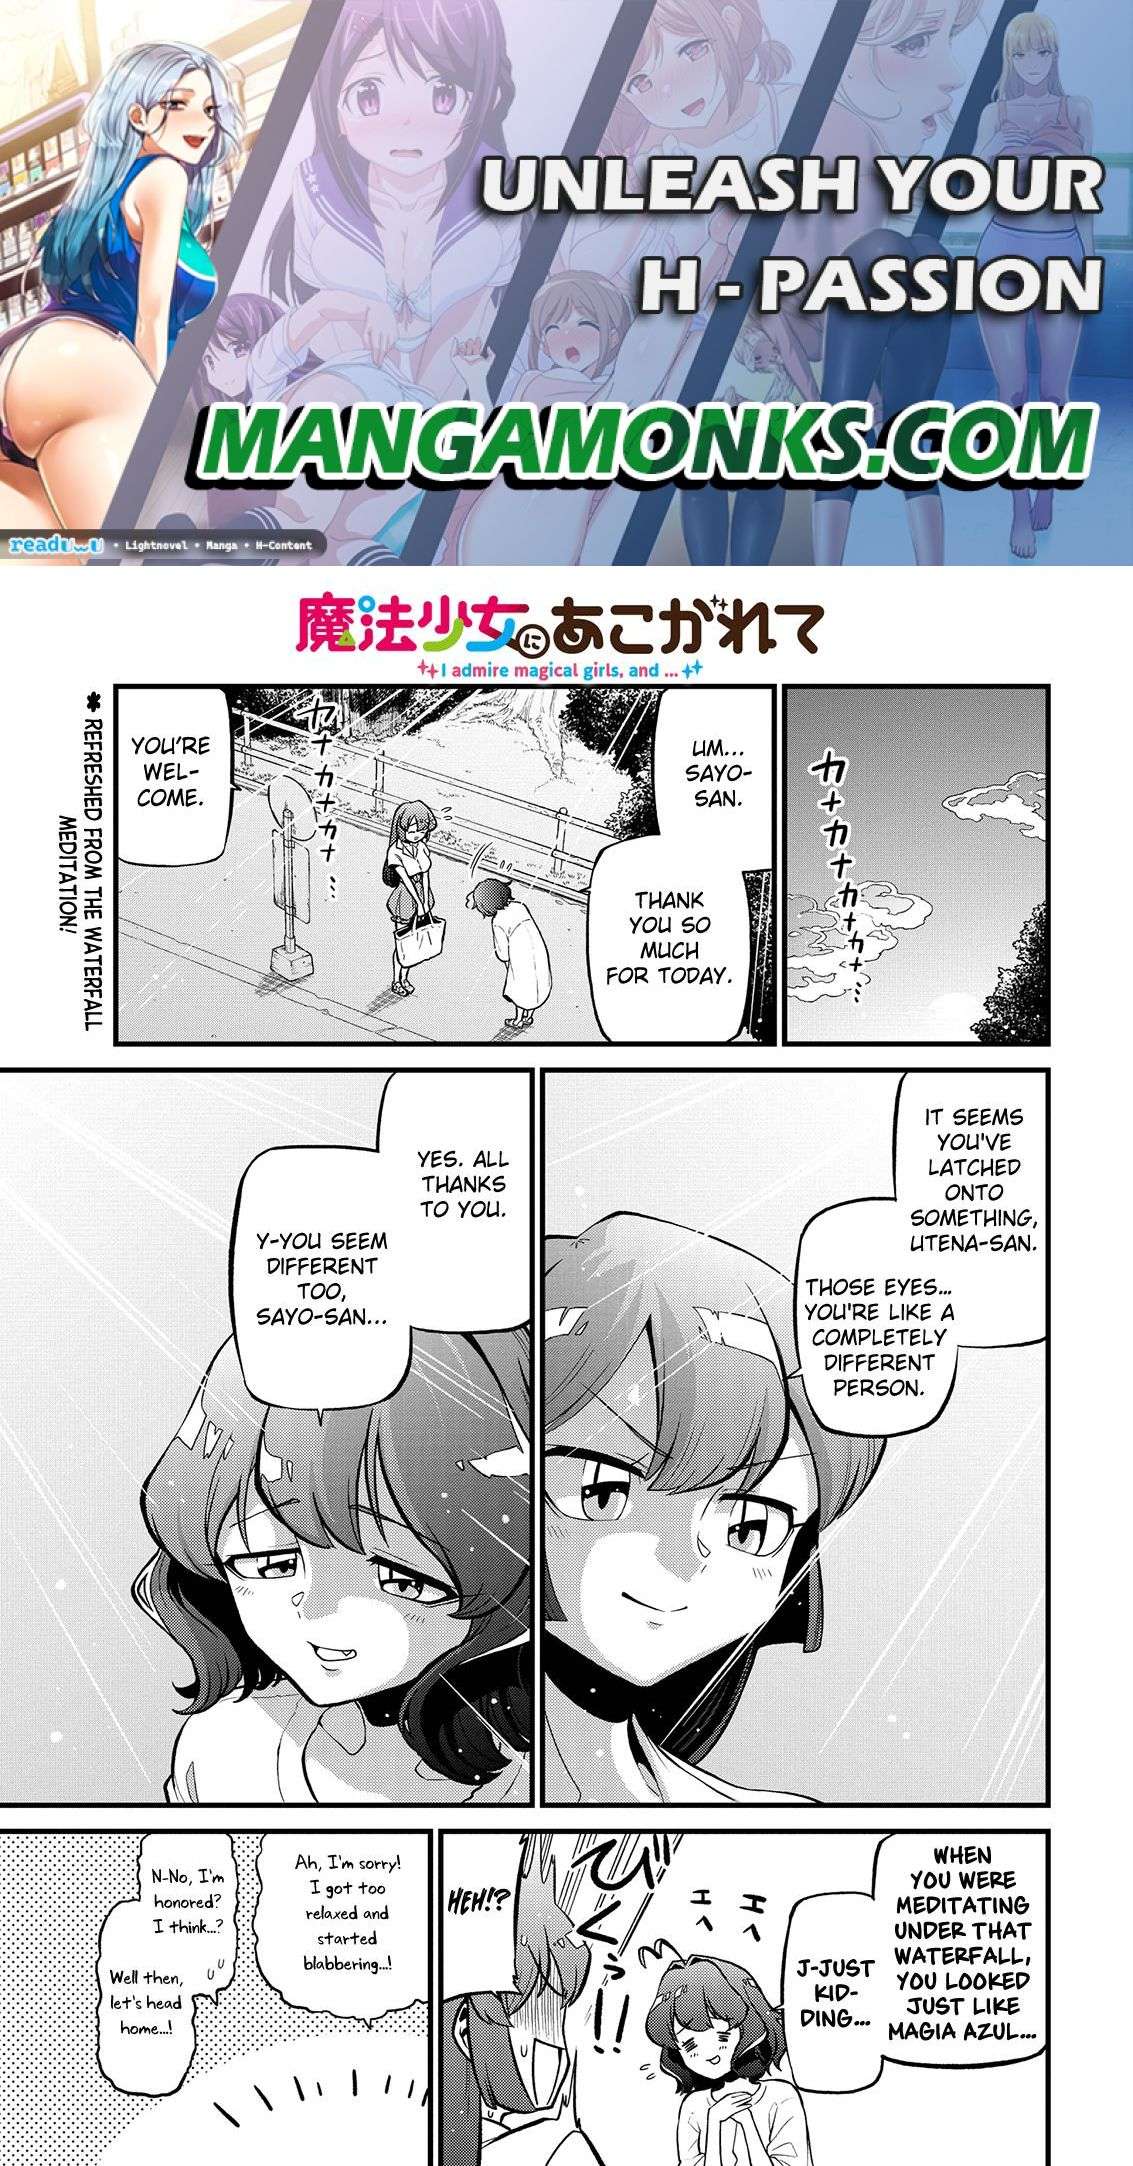 Gushing over Magical Girls - chapter 39 - #1